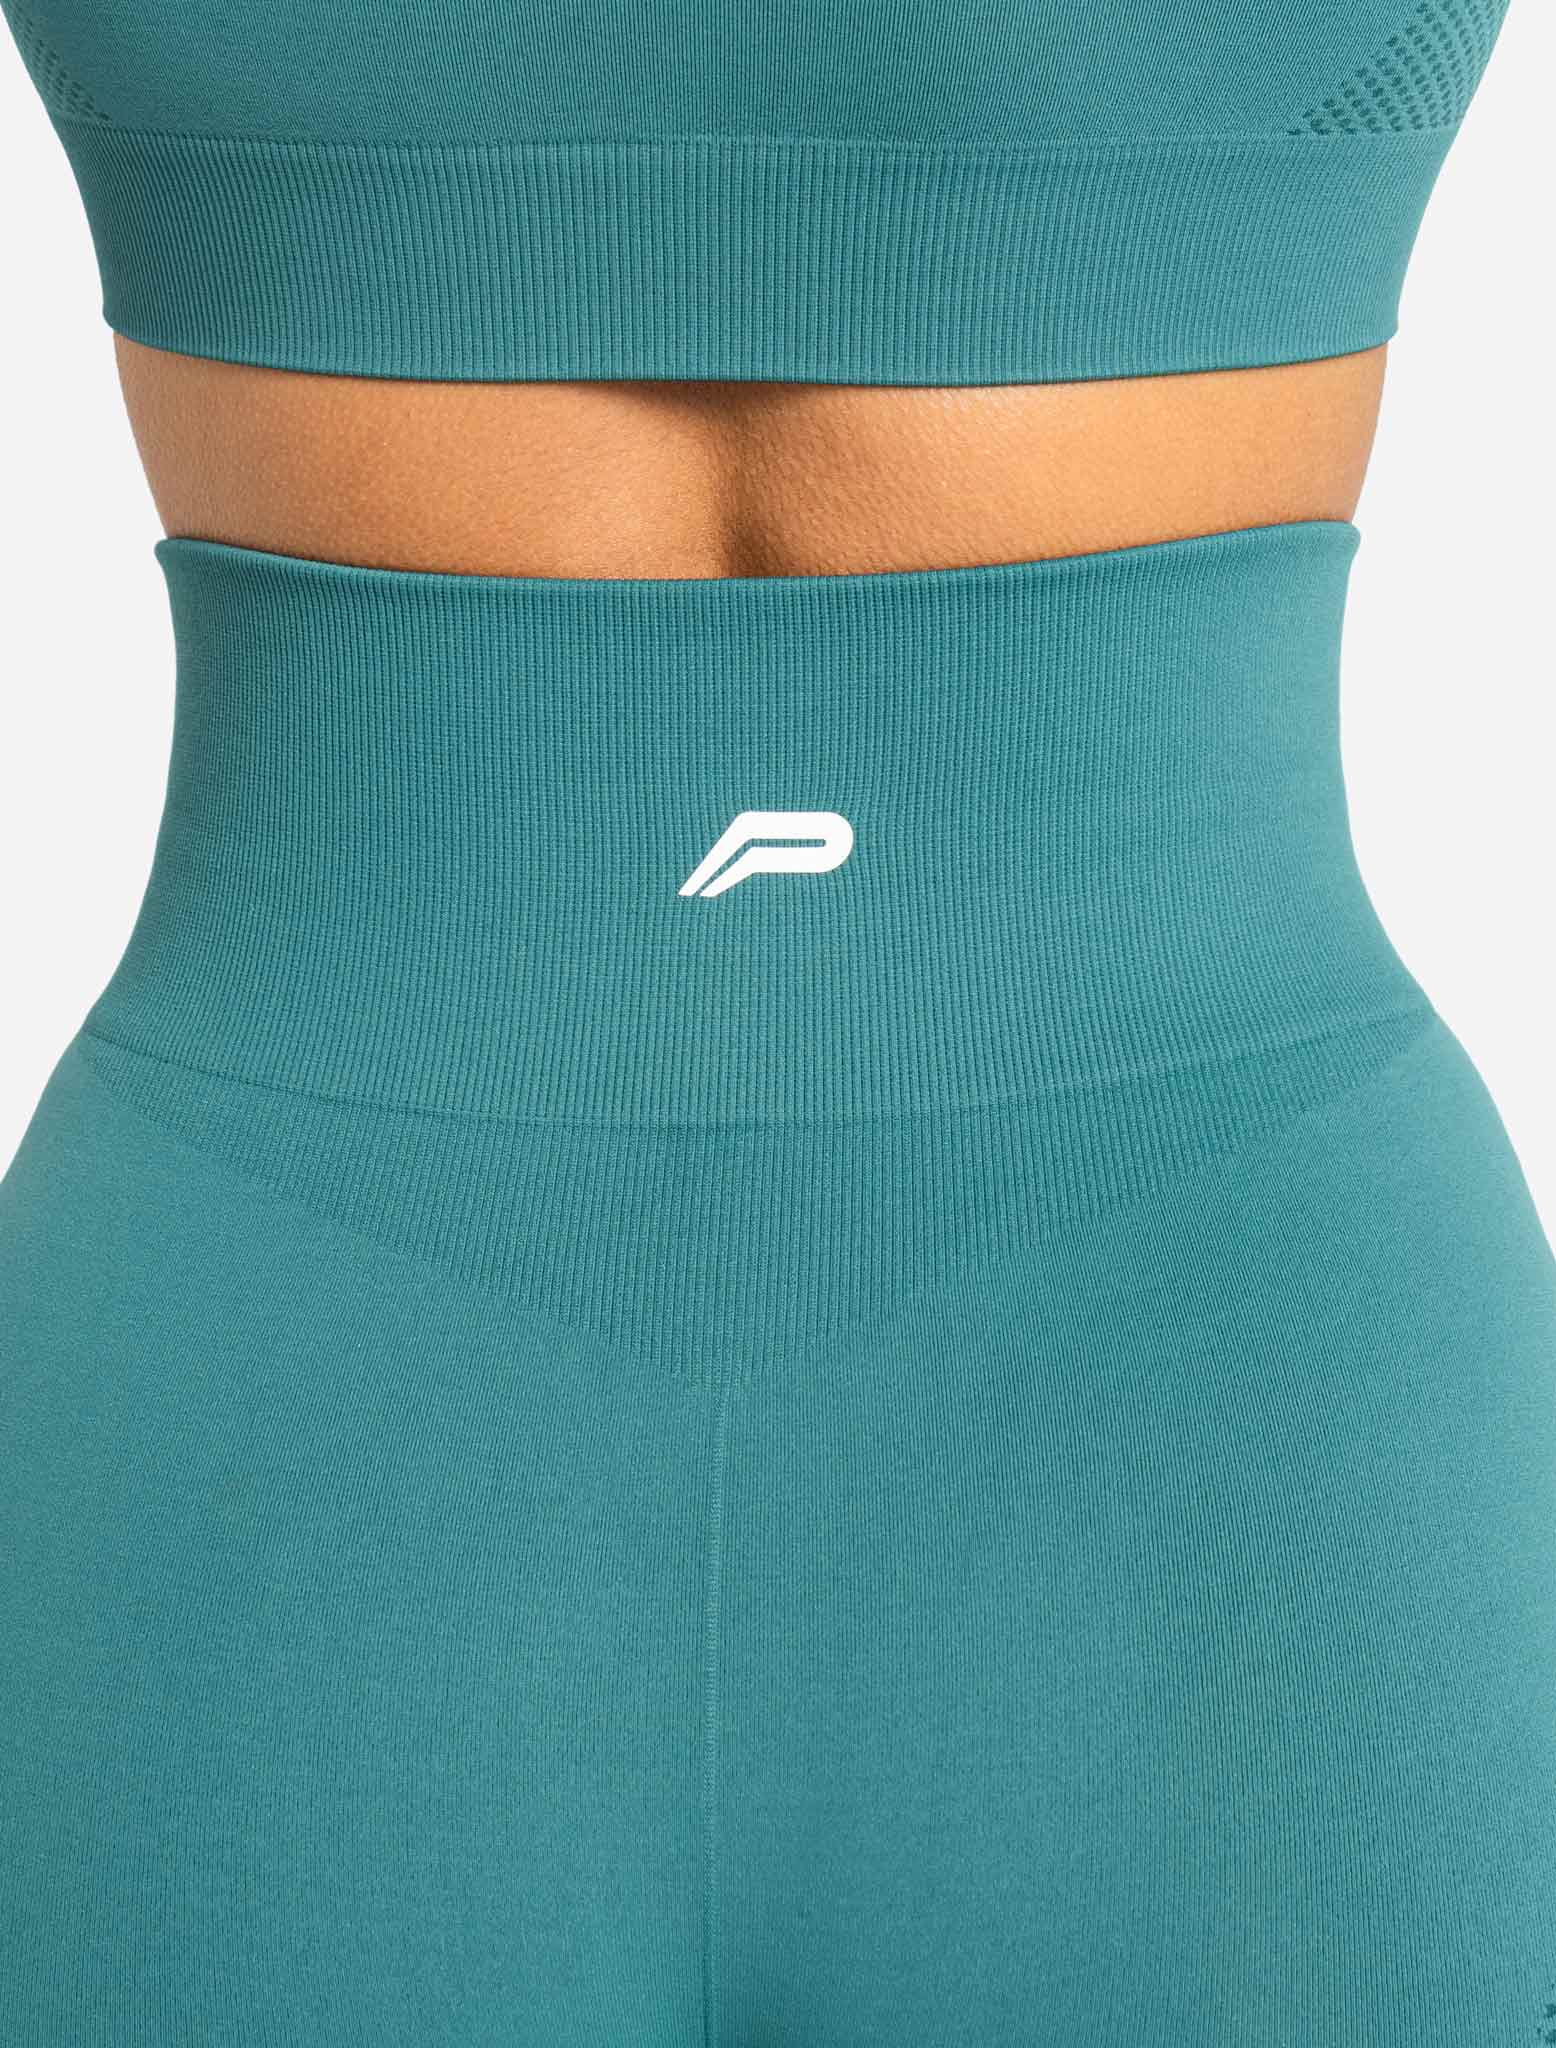 Move Seamless Shorts / Teal Pursue Fitness 5